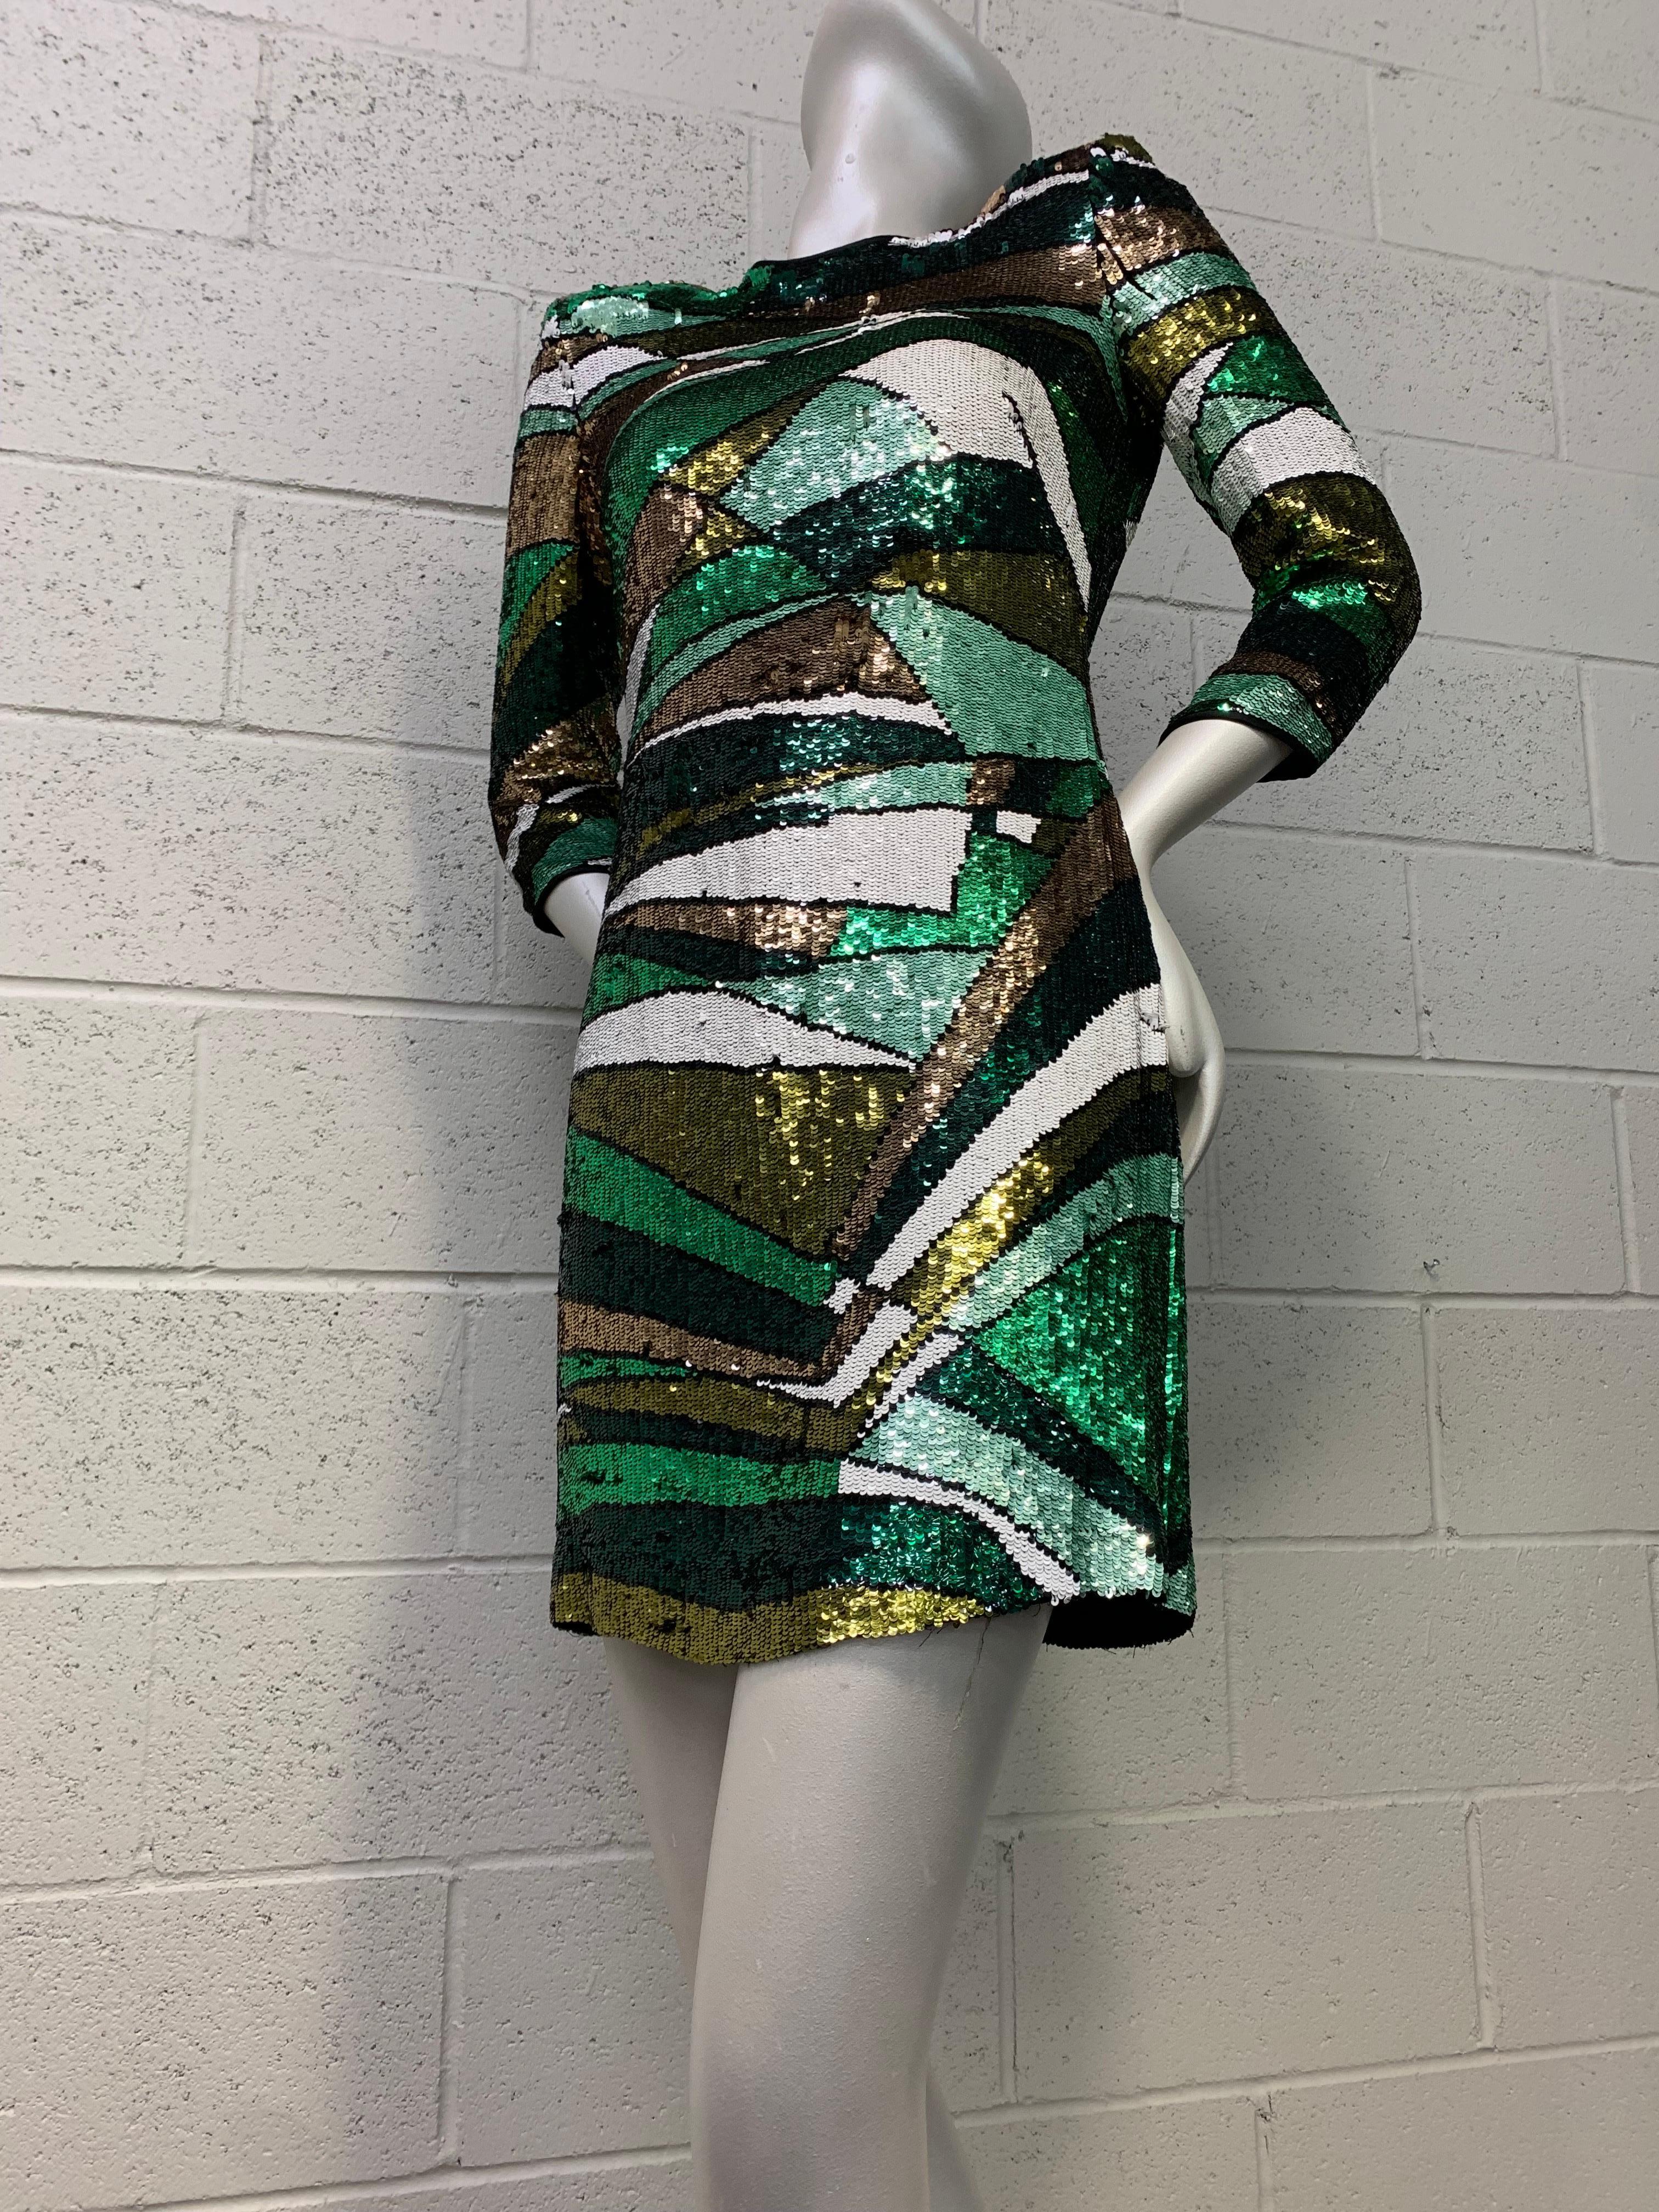 Emilio Pucci Green Metallic Prism Pattern Sequin Mini Dress w Open Keyhole Back In New Condition For Sale In Gresham, OR